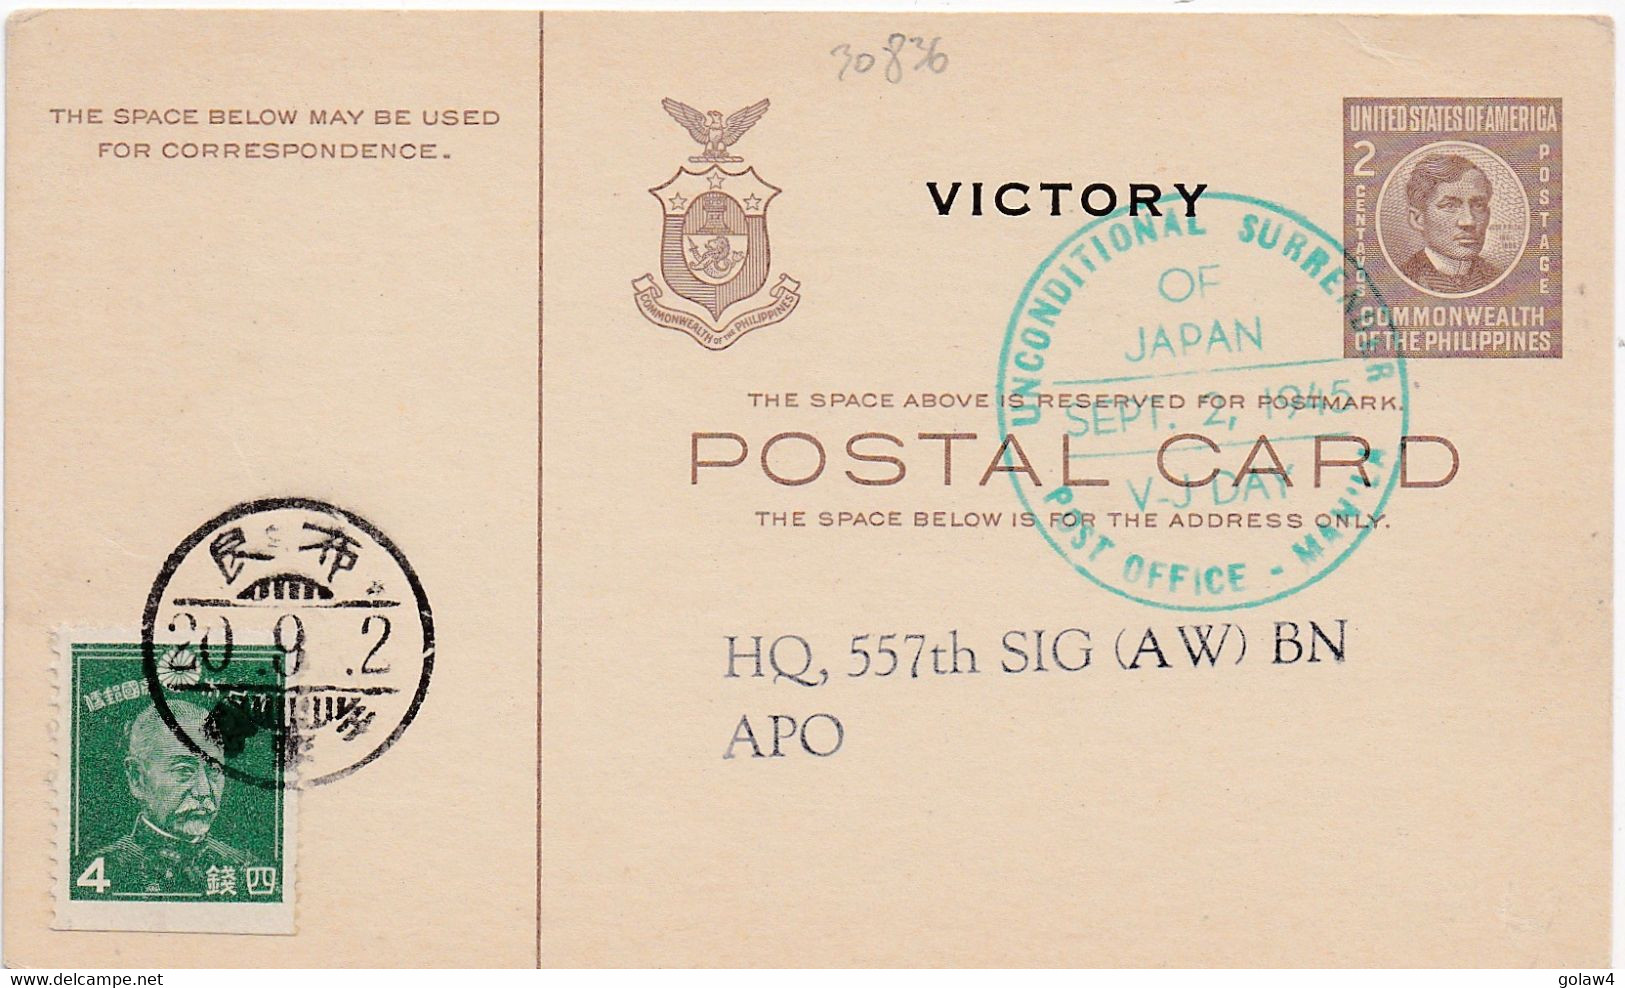 30836# ENTIER POSTAL COMMENWEALTH PHILIPPINES VICTORY UNCONDITIONAL SURRENDER OF JAPAN SEPT 2 1945 STATIONERY GANZSACHE - Philippines